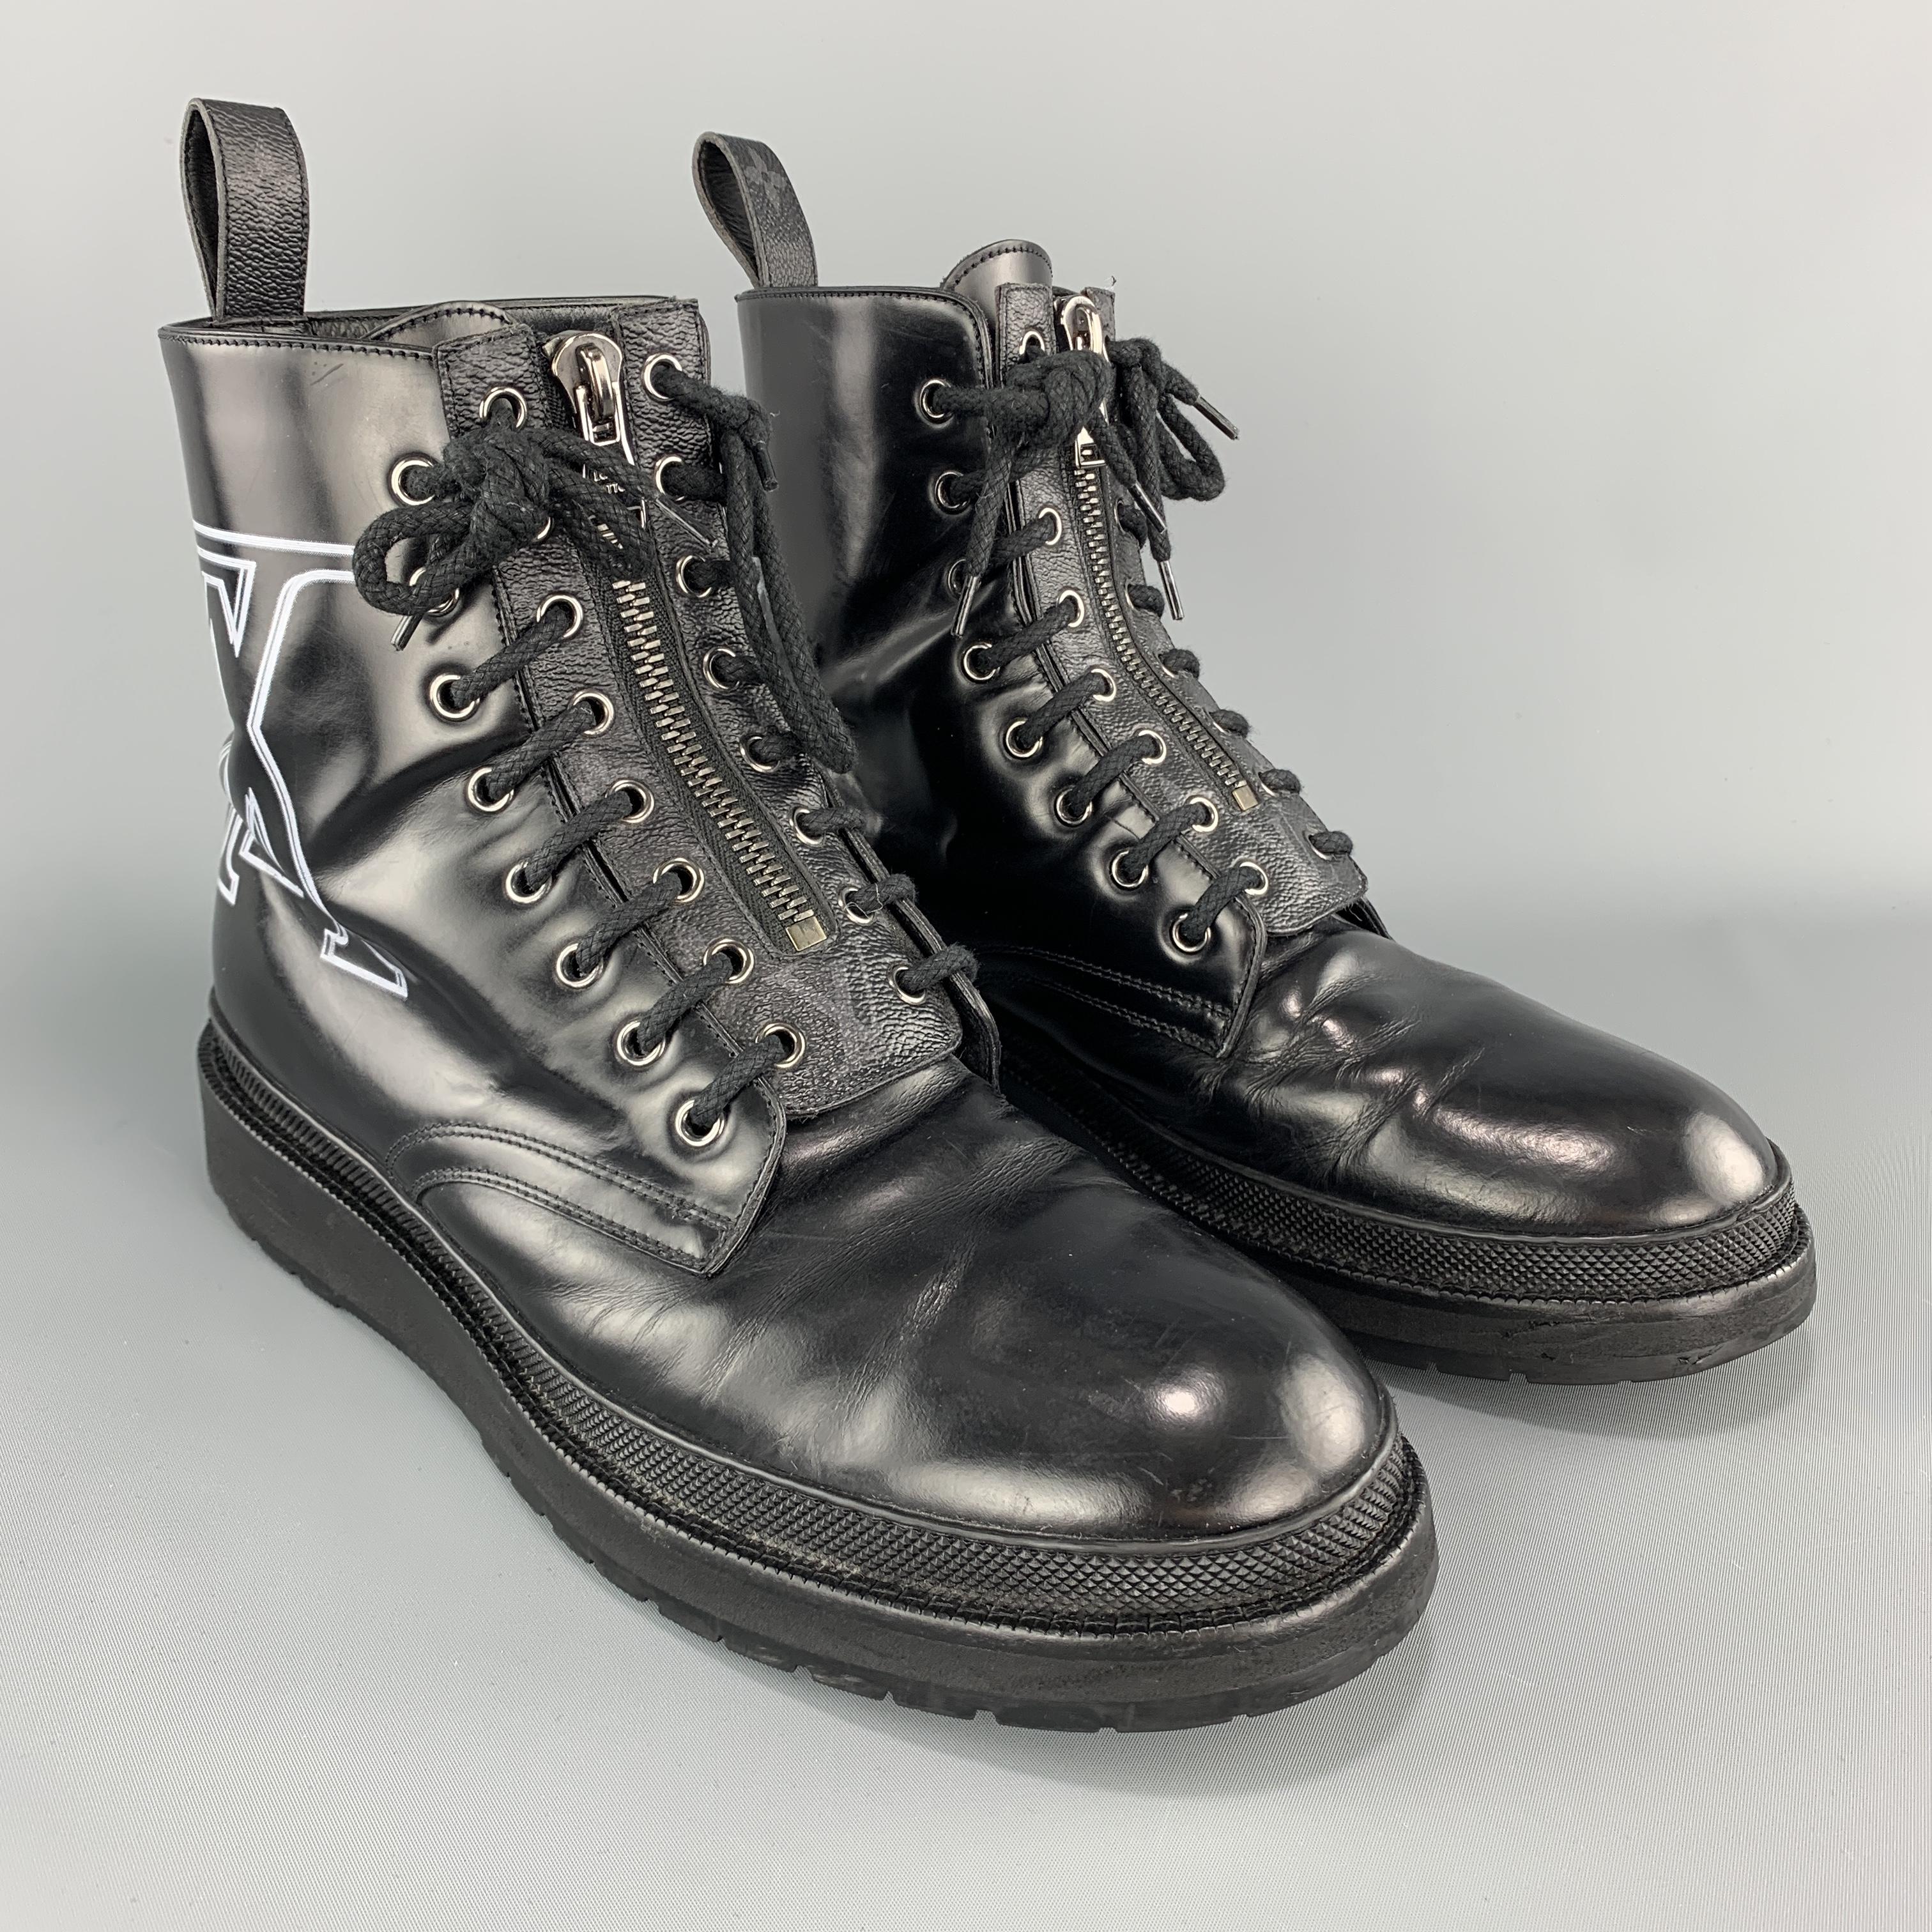 LOUIS VUITTON boots come in smooth black leather with a lace up and monogram coated canvas zip up front, white inverted logo print side and creeper sole. Wear throughout. Made in Italy. 

Good Pre-Owned Condition.
Marked: UK 9.5

Outsole: 12.75 x